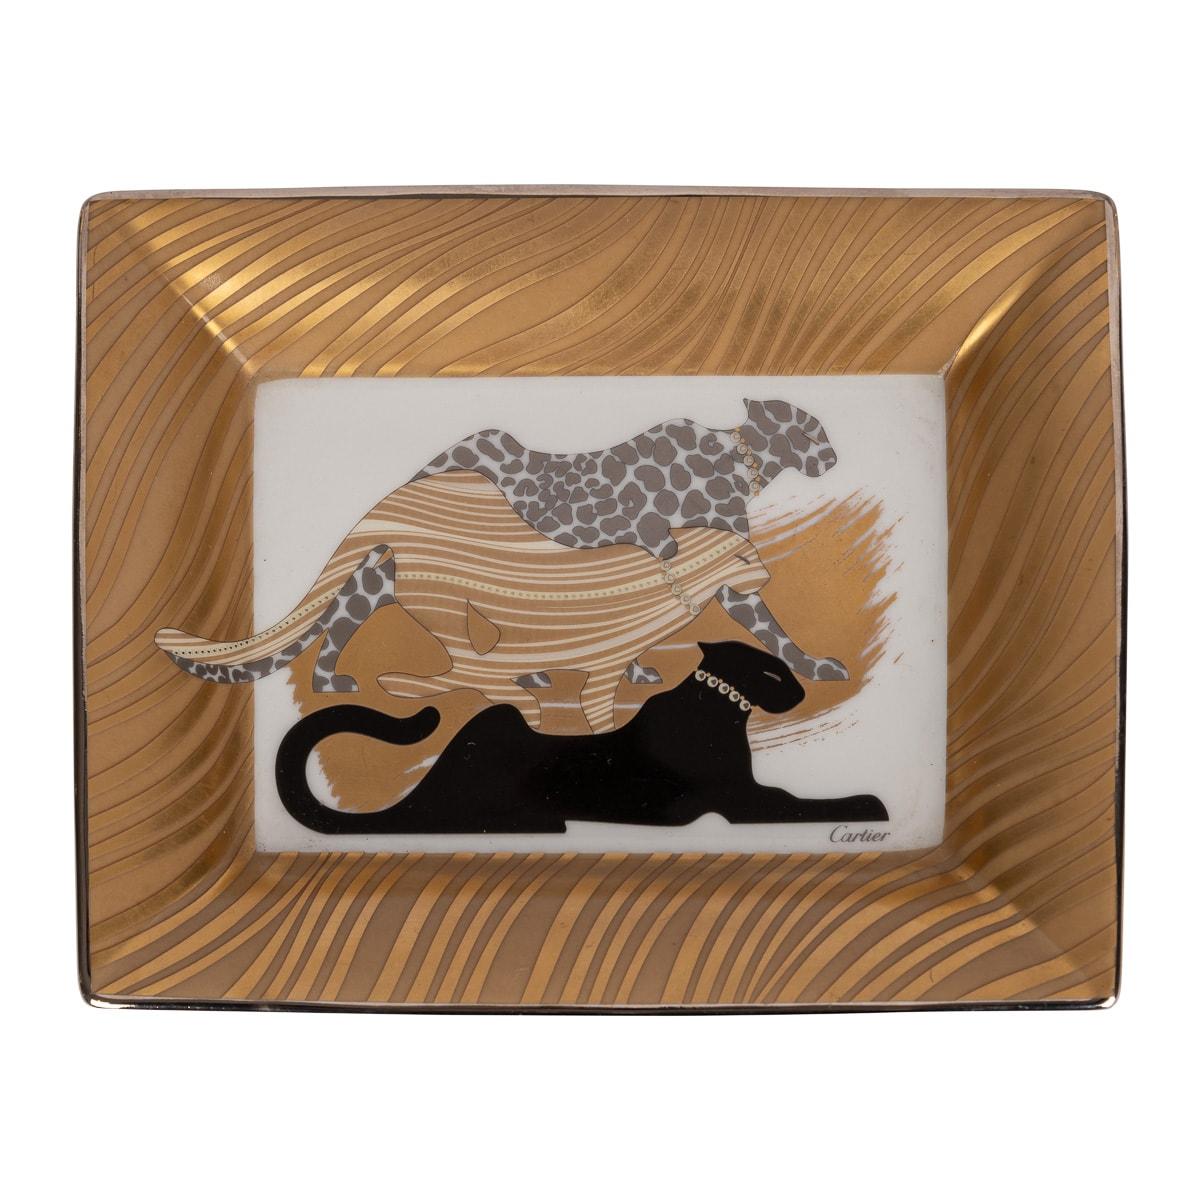 A ceramic ashtray by Cartier, made in France in the latter half of the 20th century. These ashtrays have always been very collectable with the vintage models in particular. This one has a striped gold colour border with three different colour